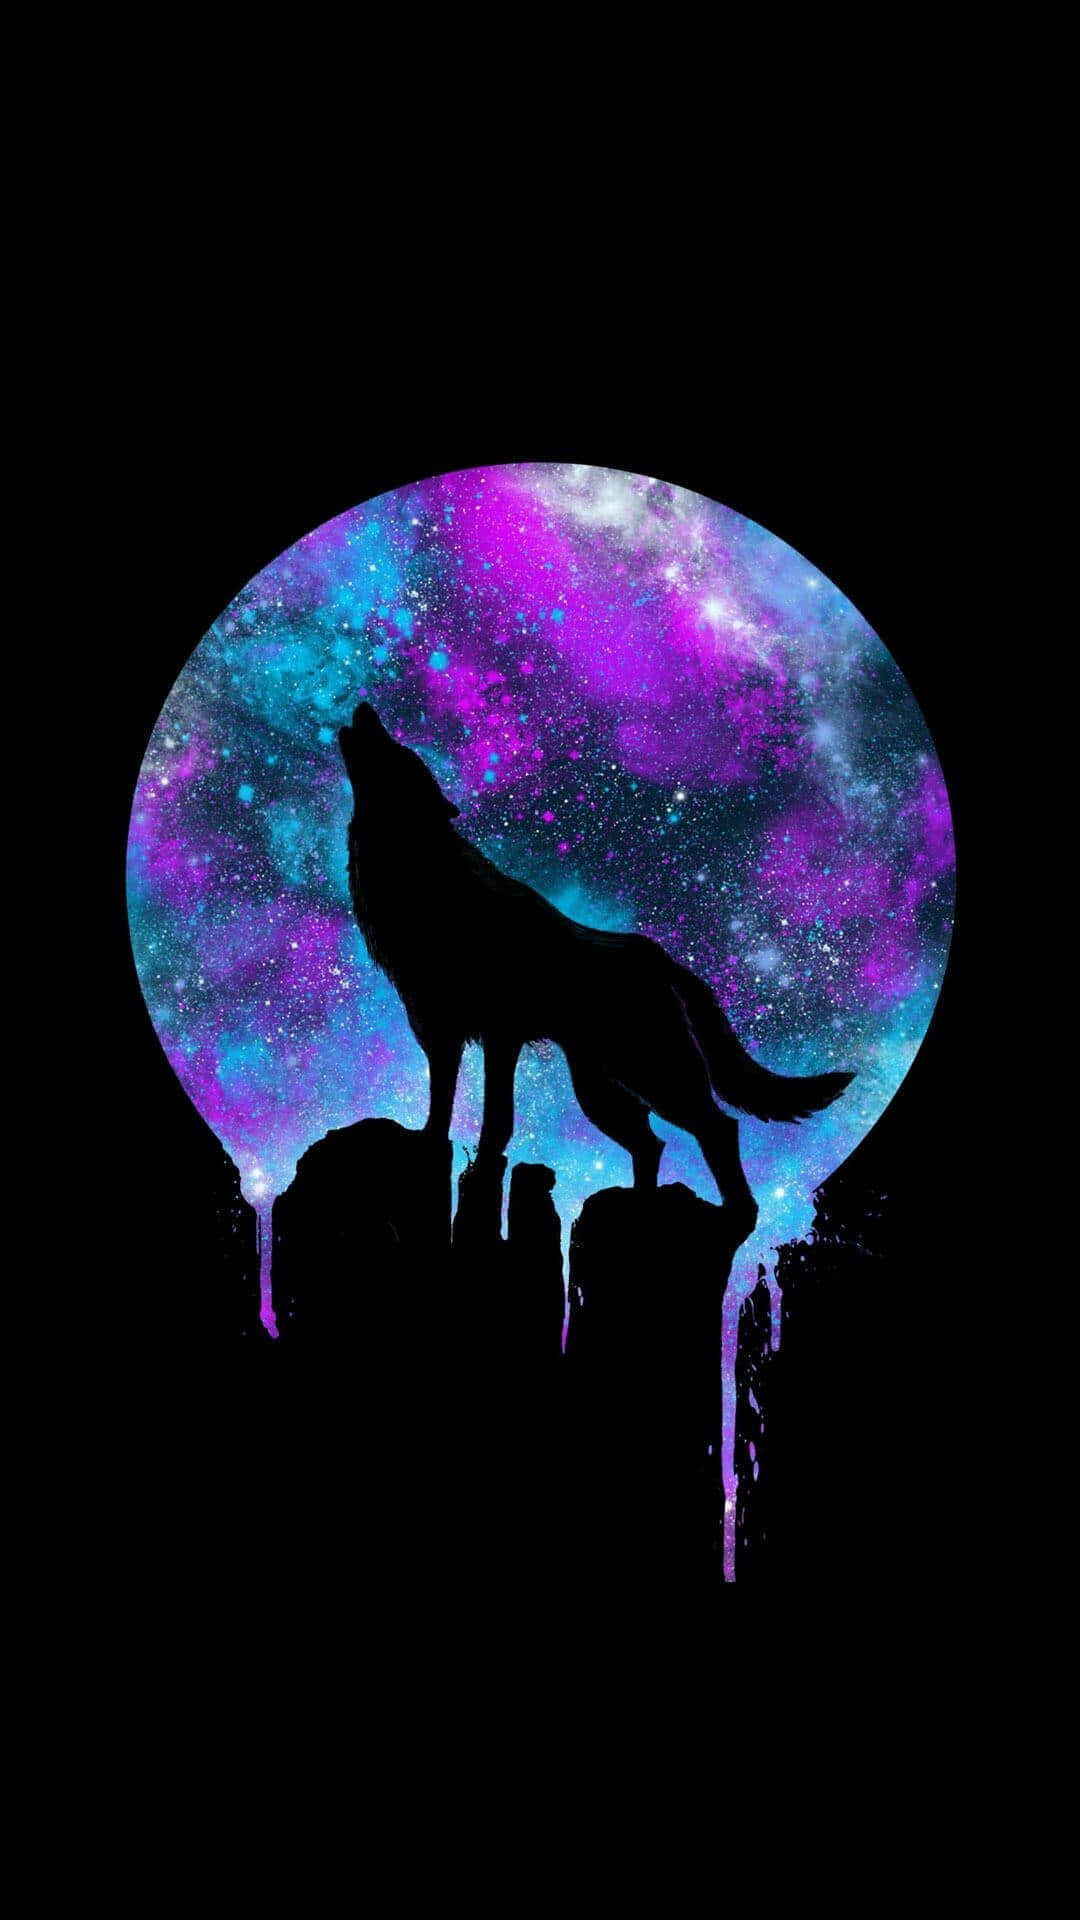 Majestic Wolf Silhouette Against a Radiant Sky Wallpaper